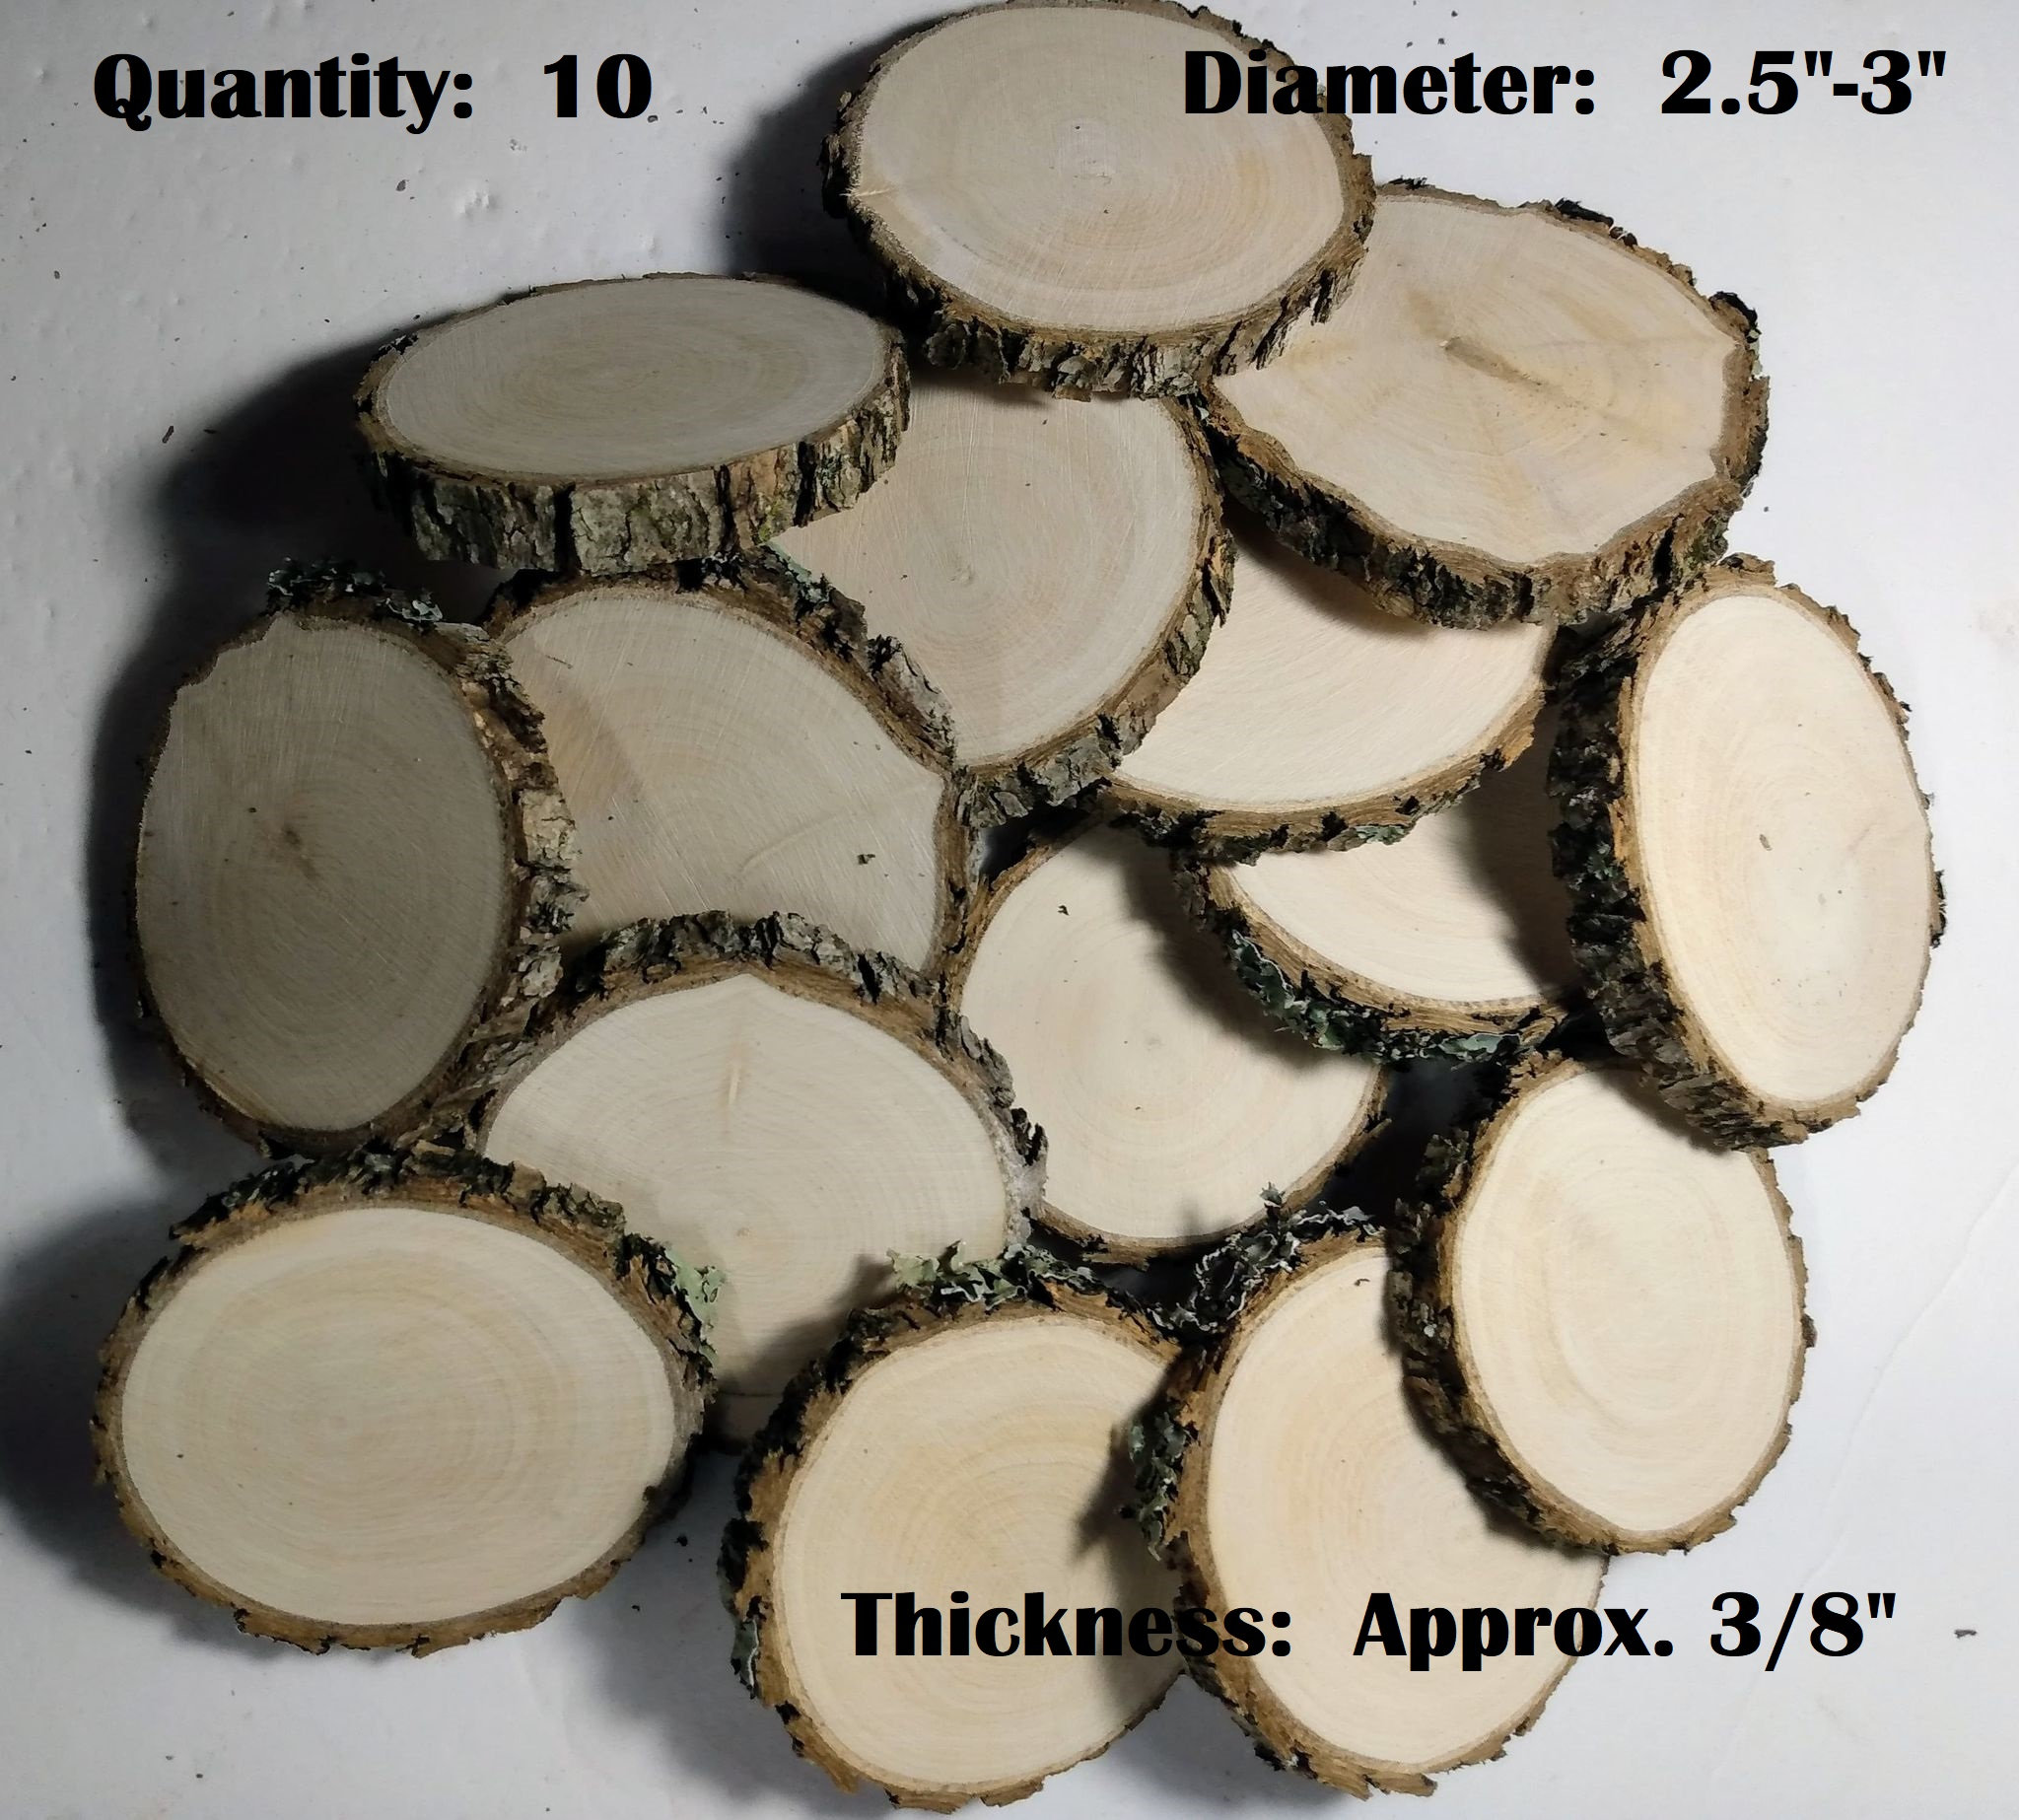 12 Pcs 35mm Natural Wood Circles Wooden Discs Unfinished Round Disk Bead  W897 